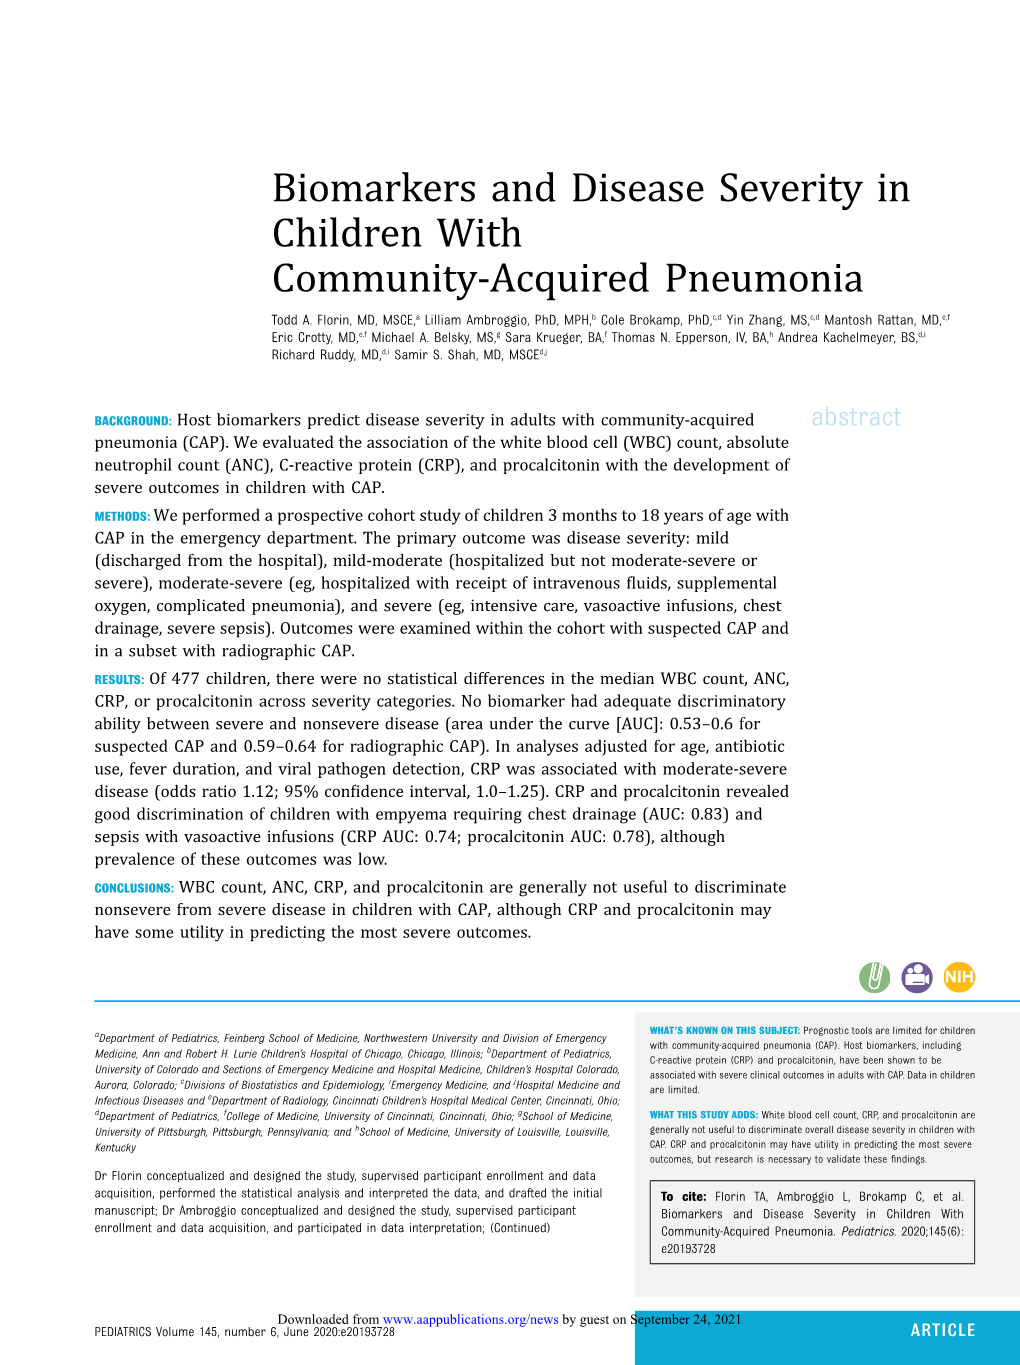 Biomarkers and Disease Severity in Children with Community-Acquired Pneumonia Todd A